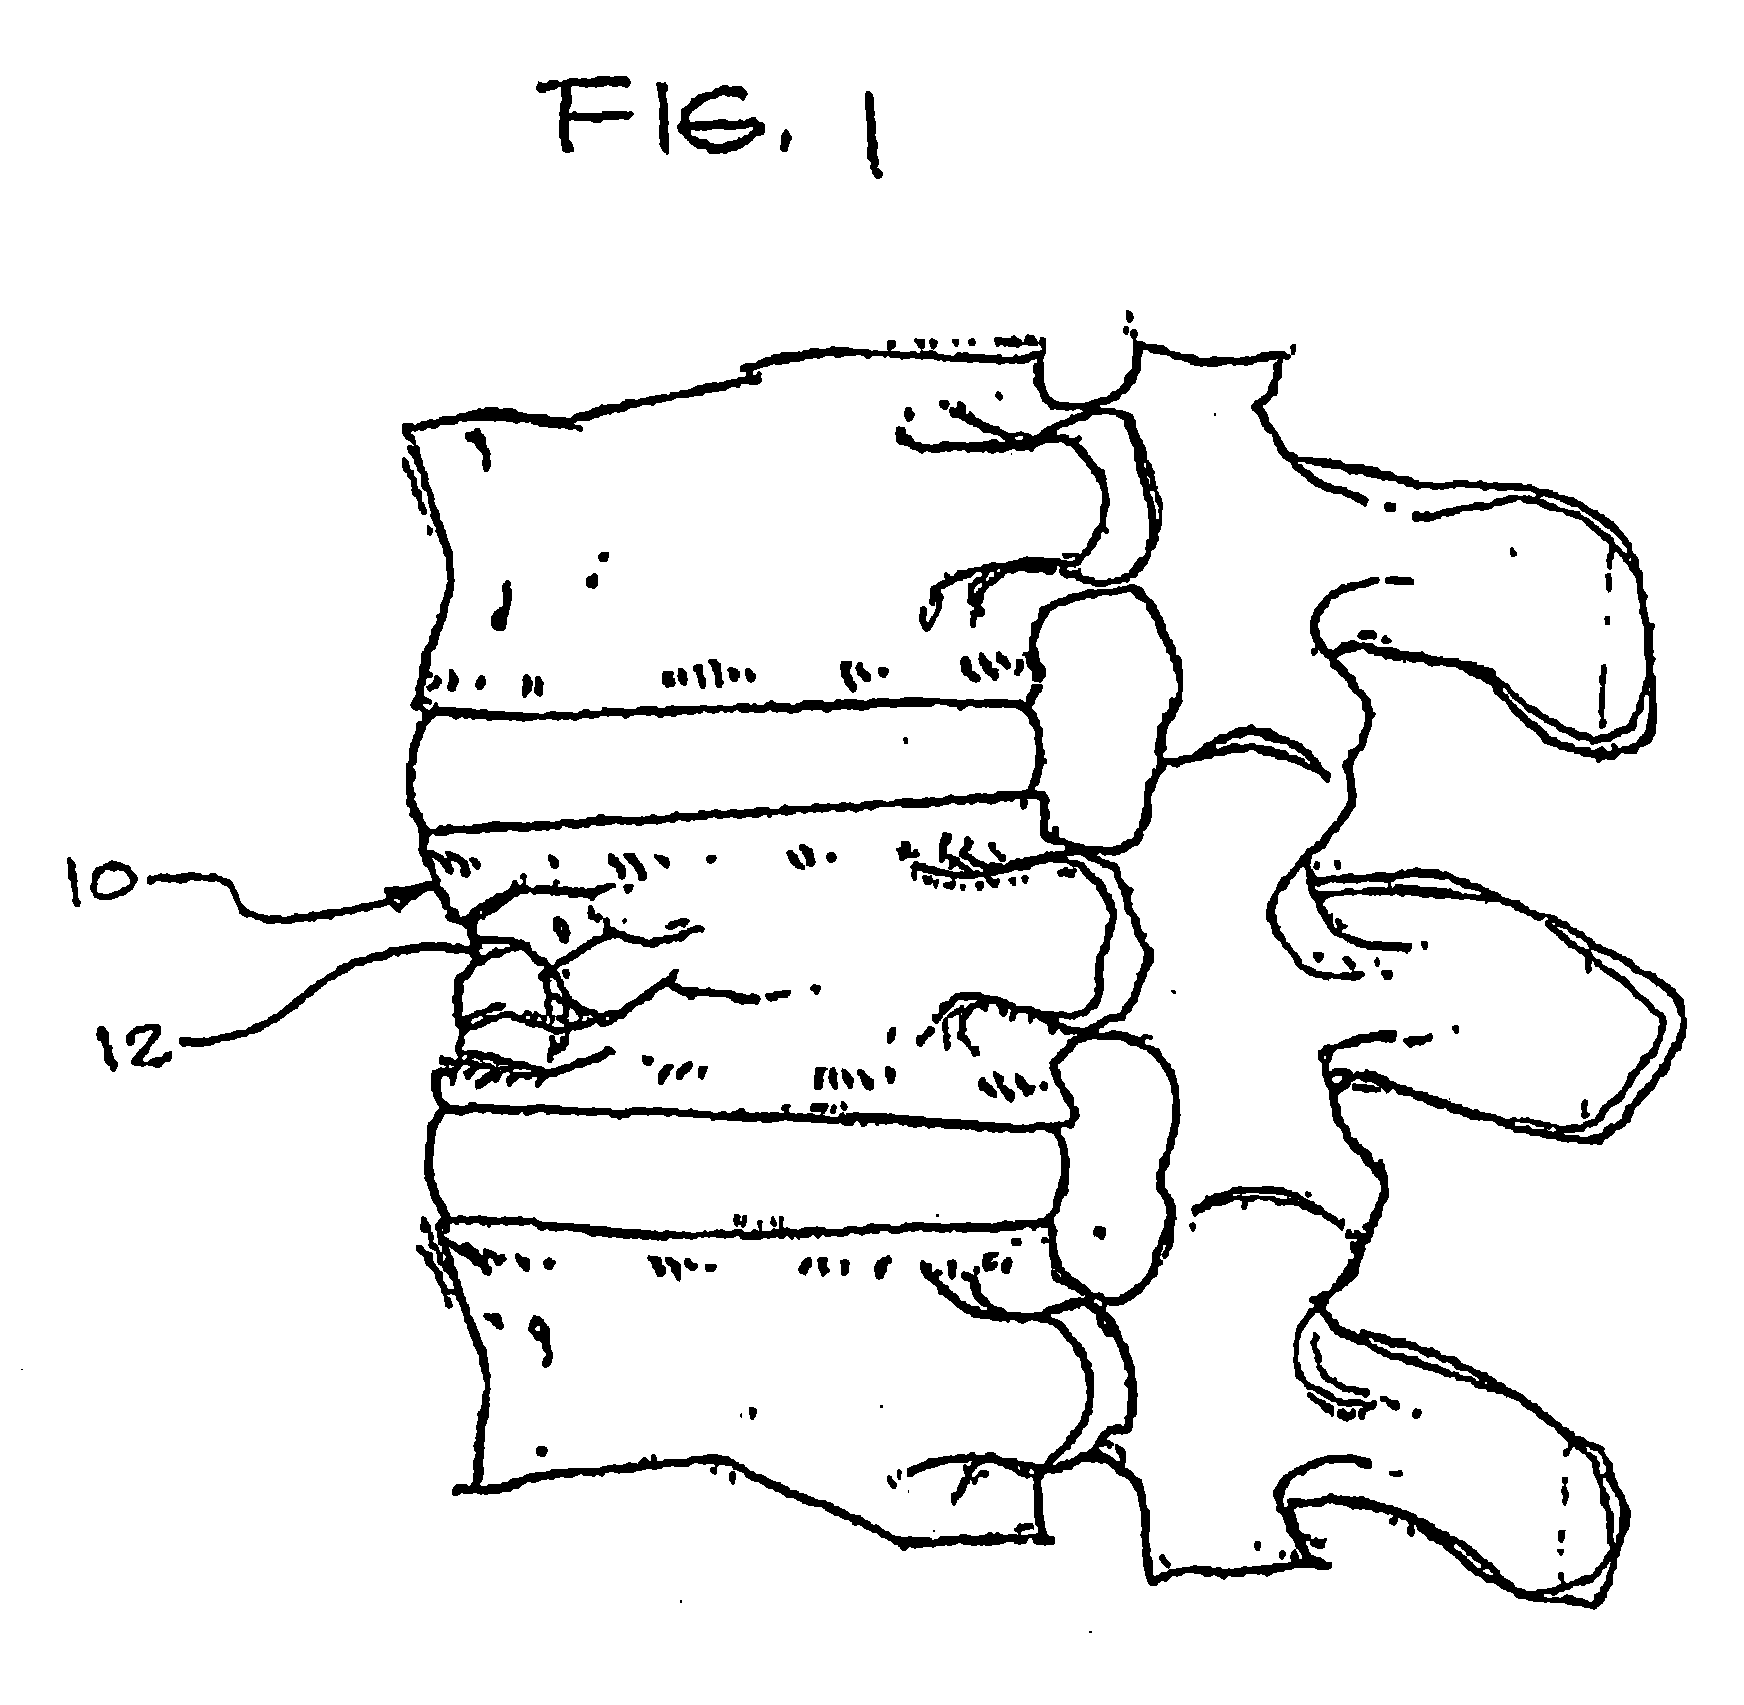 Expandable porous mesh bag device and methods of use for reduction, filling, fixation and supporting of bone